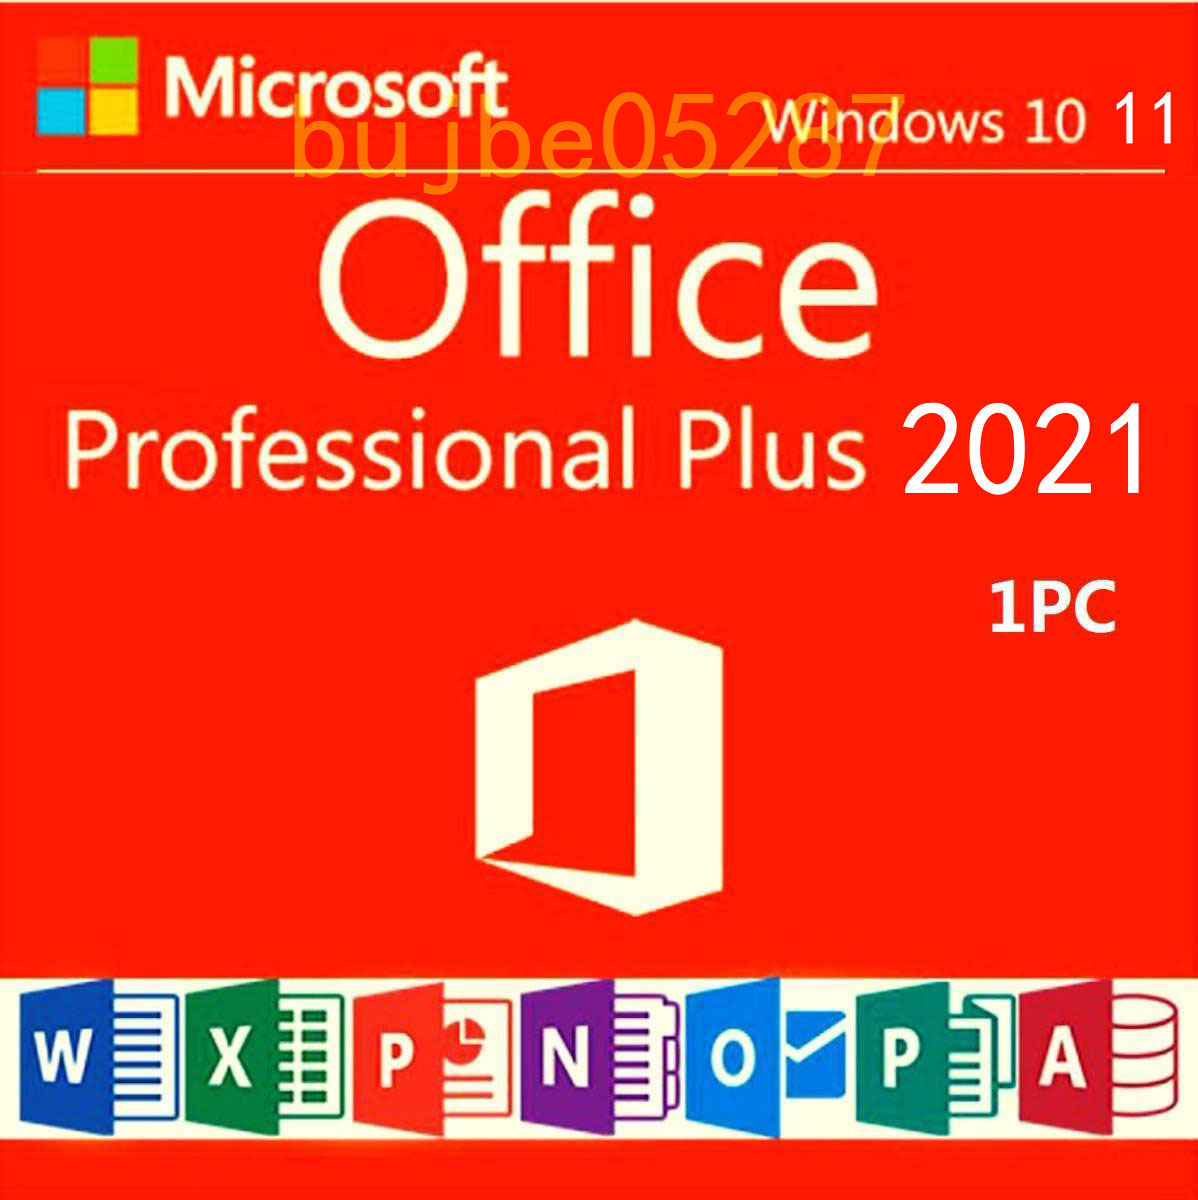  newest Win11Pro/ camera built-in /11 type touch panel / Note PC/ new goods SSD256/4GB/3 generation i3/ASUS X202E MS Office2021ProPlus installing operation superior article 